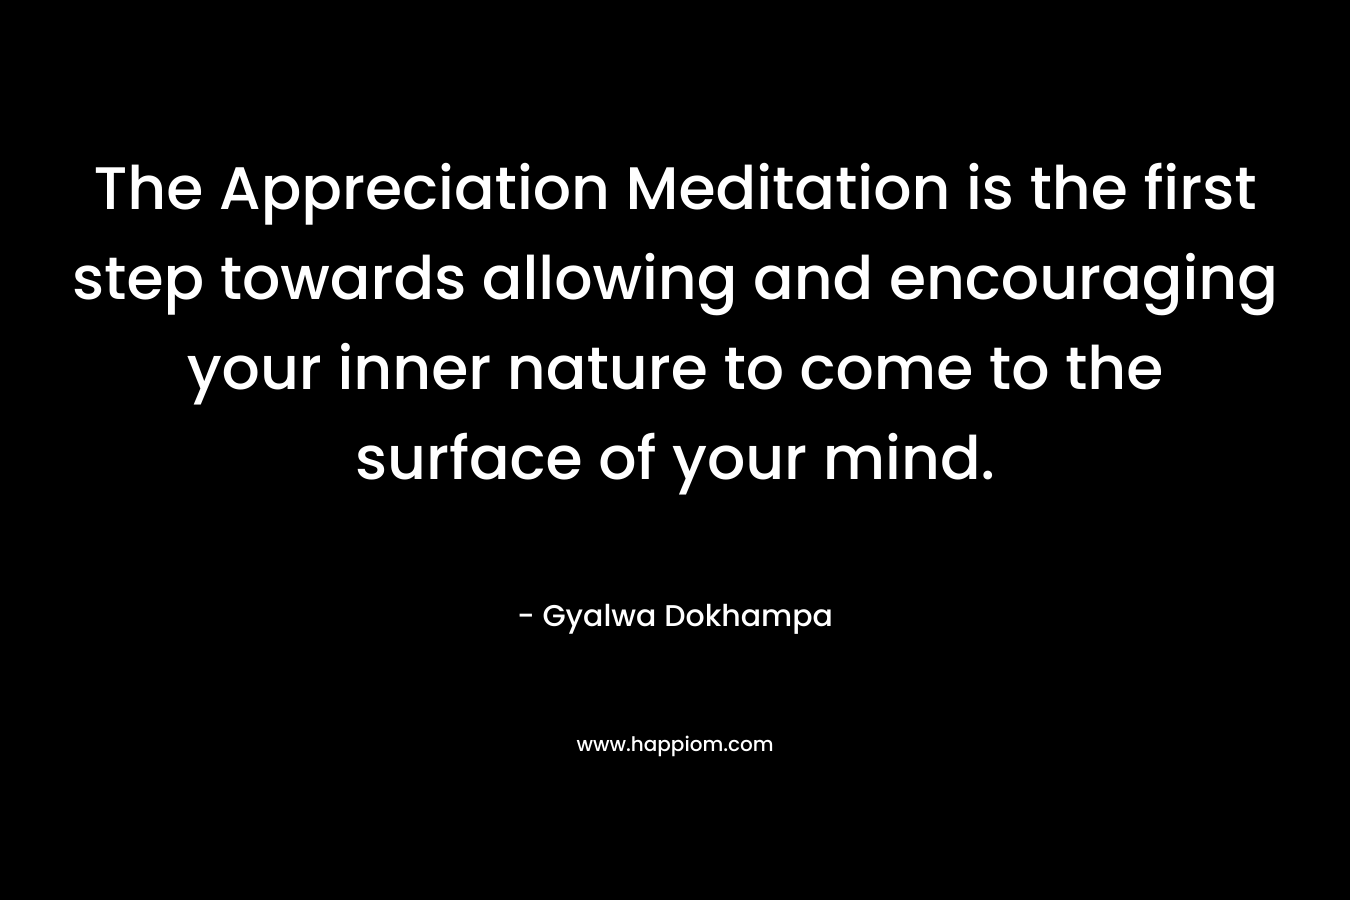 The Appreciation Meditation is the first step towards allowing and encouraging your inner nature to come to the surface of your mind. – Gyalwa Dokhampa